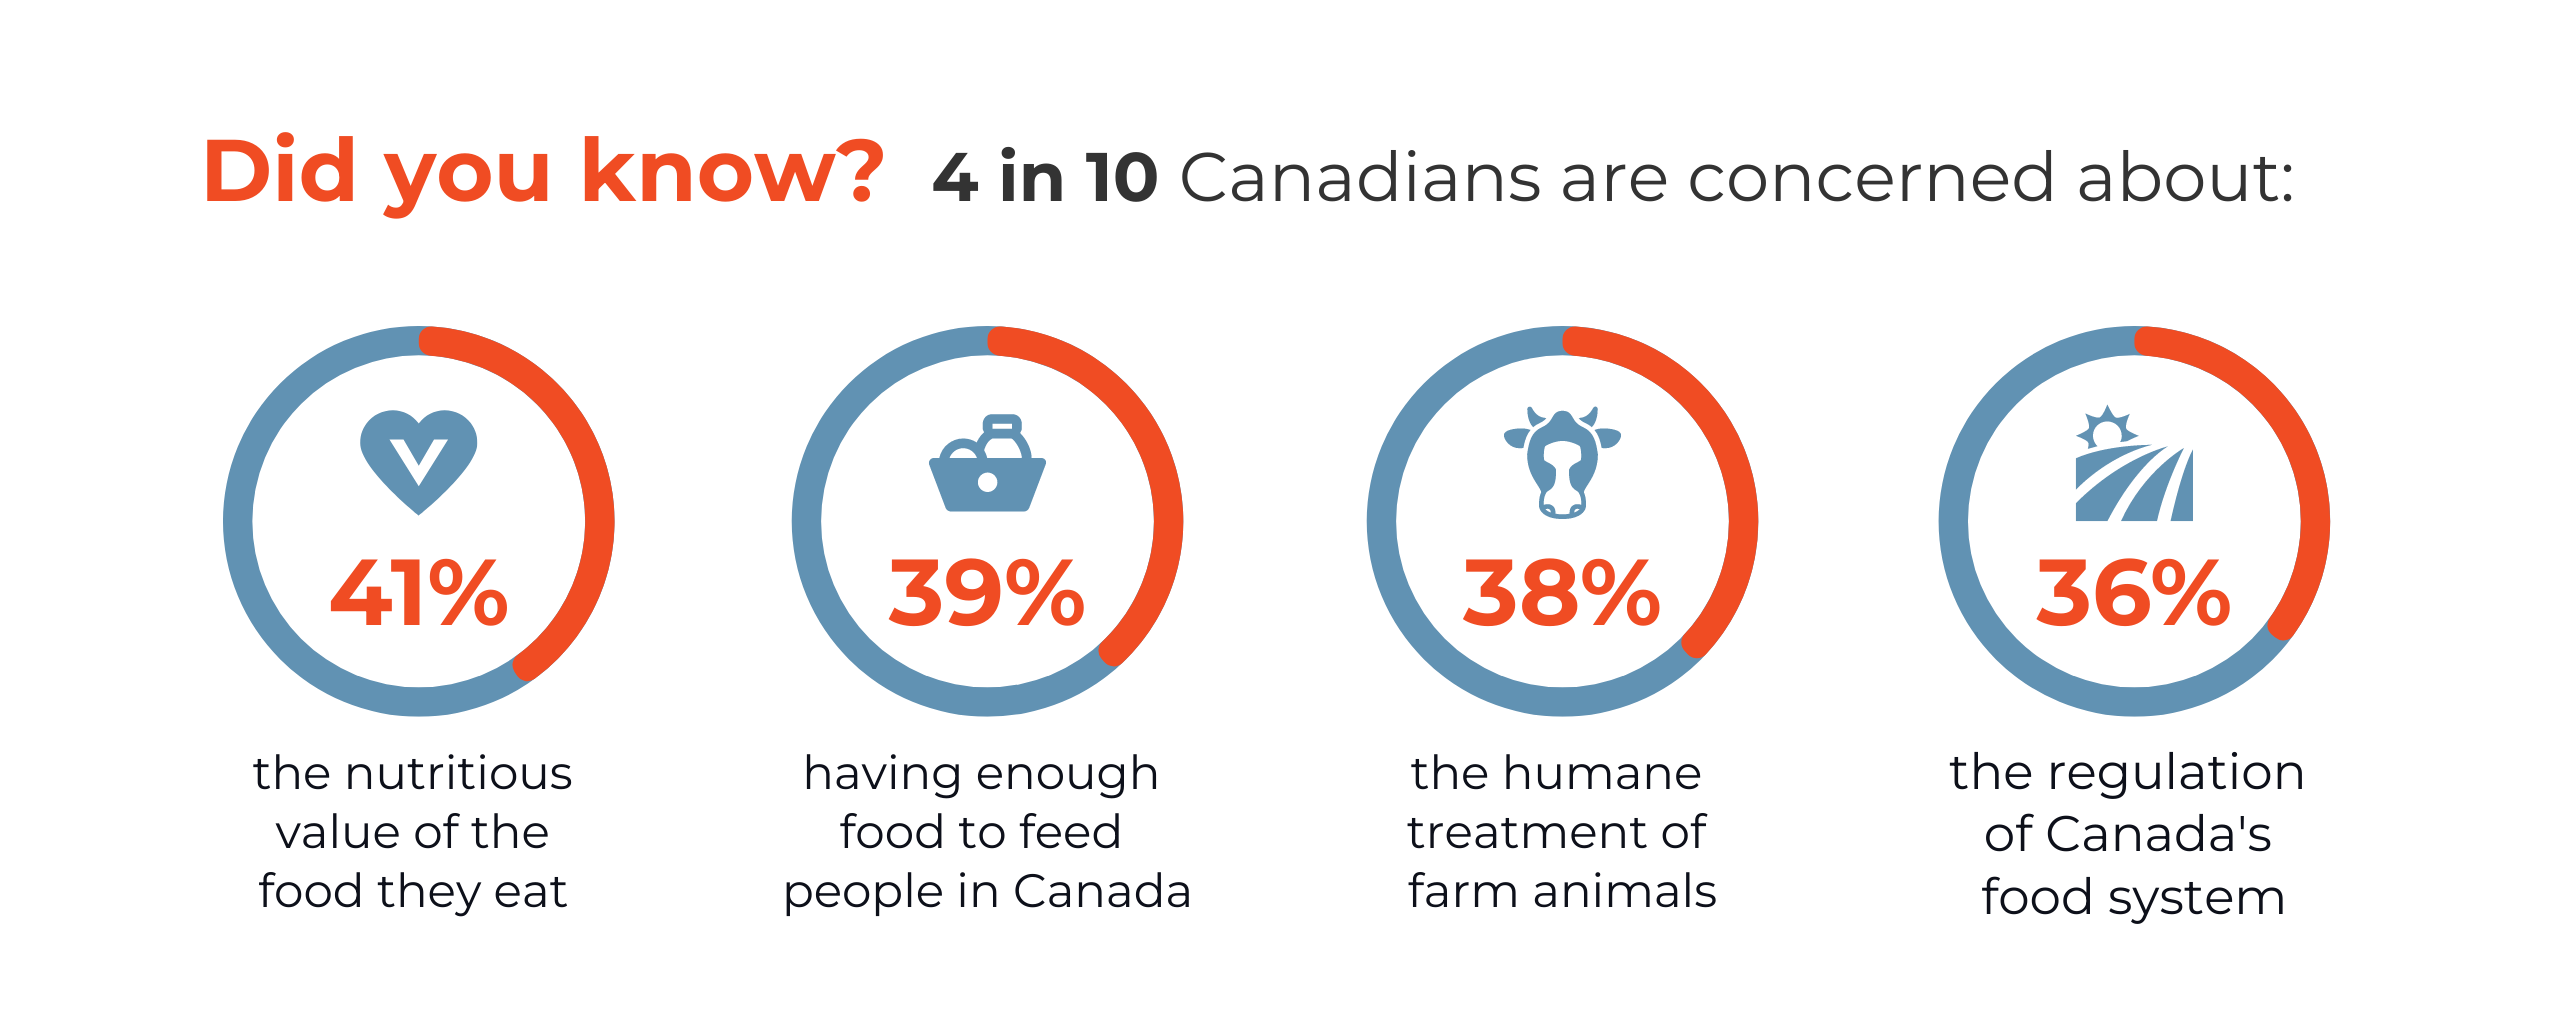 Infographic: stats of Canadian concerns about food